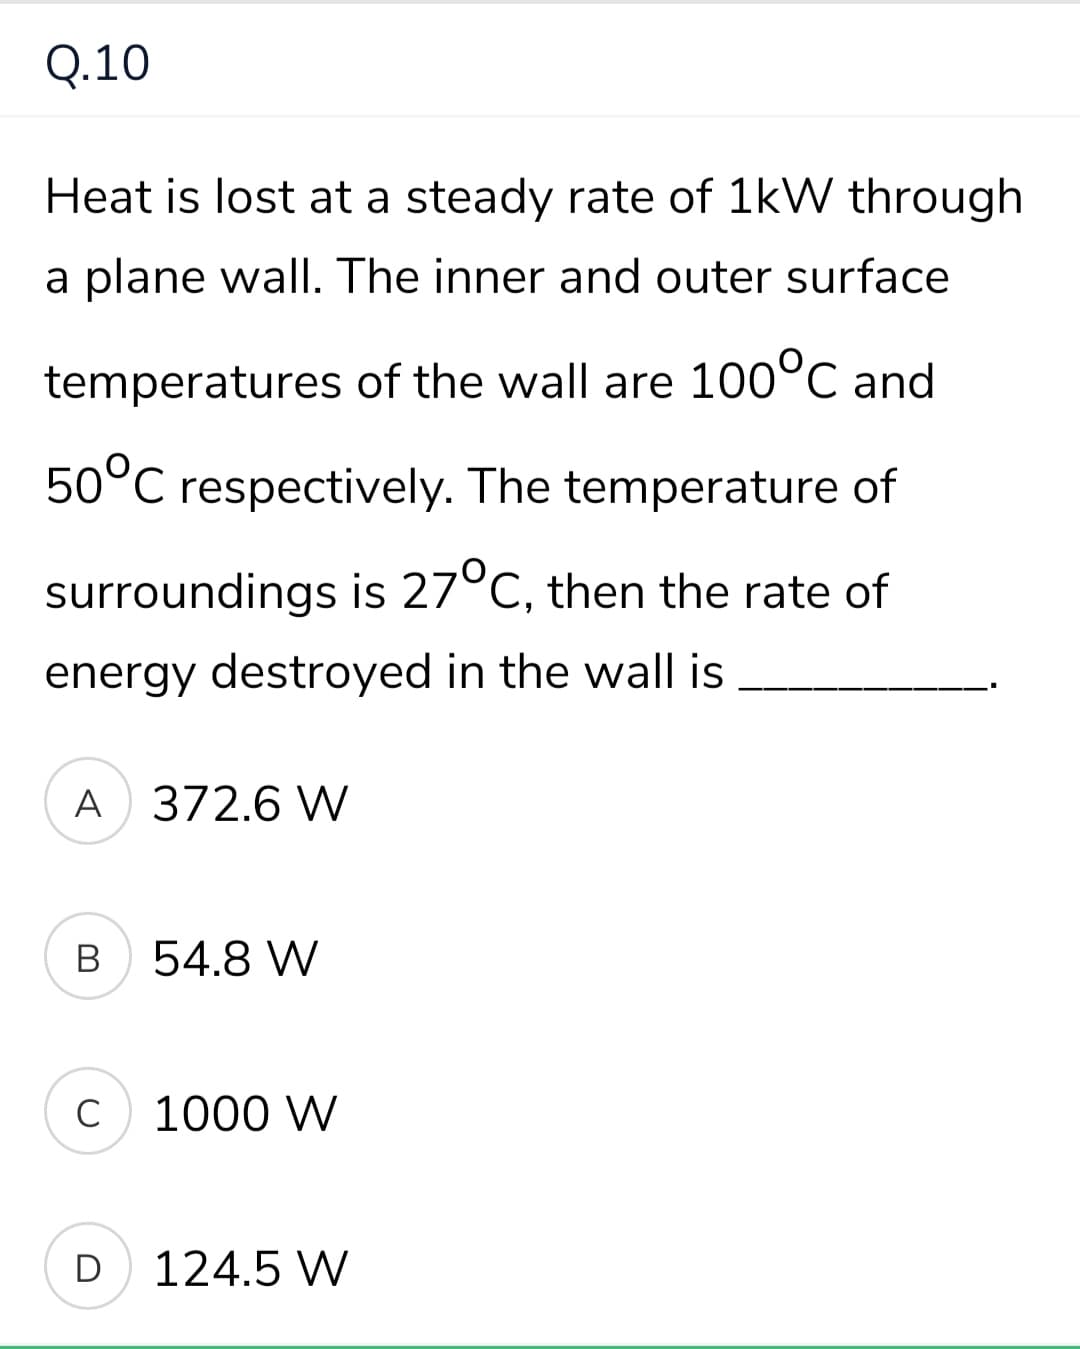 Q.10
Heat is lost at a steady rate of 1kW through
a plane wall. The inner and outer surface
temperatures of the wall are 100°C and
50°C respectively. The temperature of
surroundings is 27°C, then the rate of
energy destroyed in the wall is
A 372.6 W
В
54.8 W
C
1000 W
D
124.5 W
